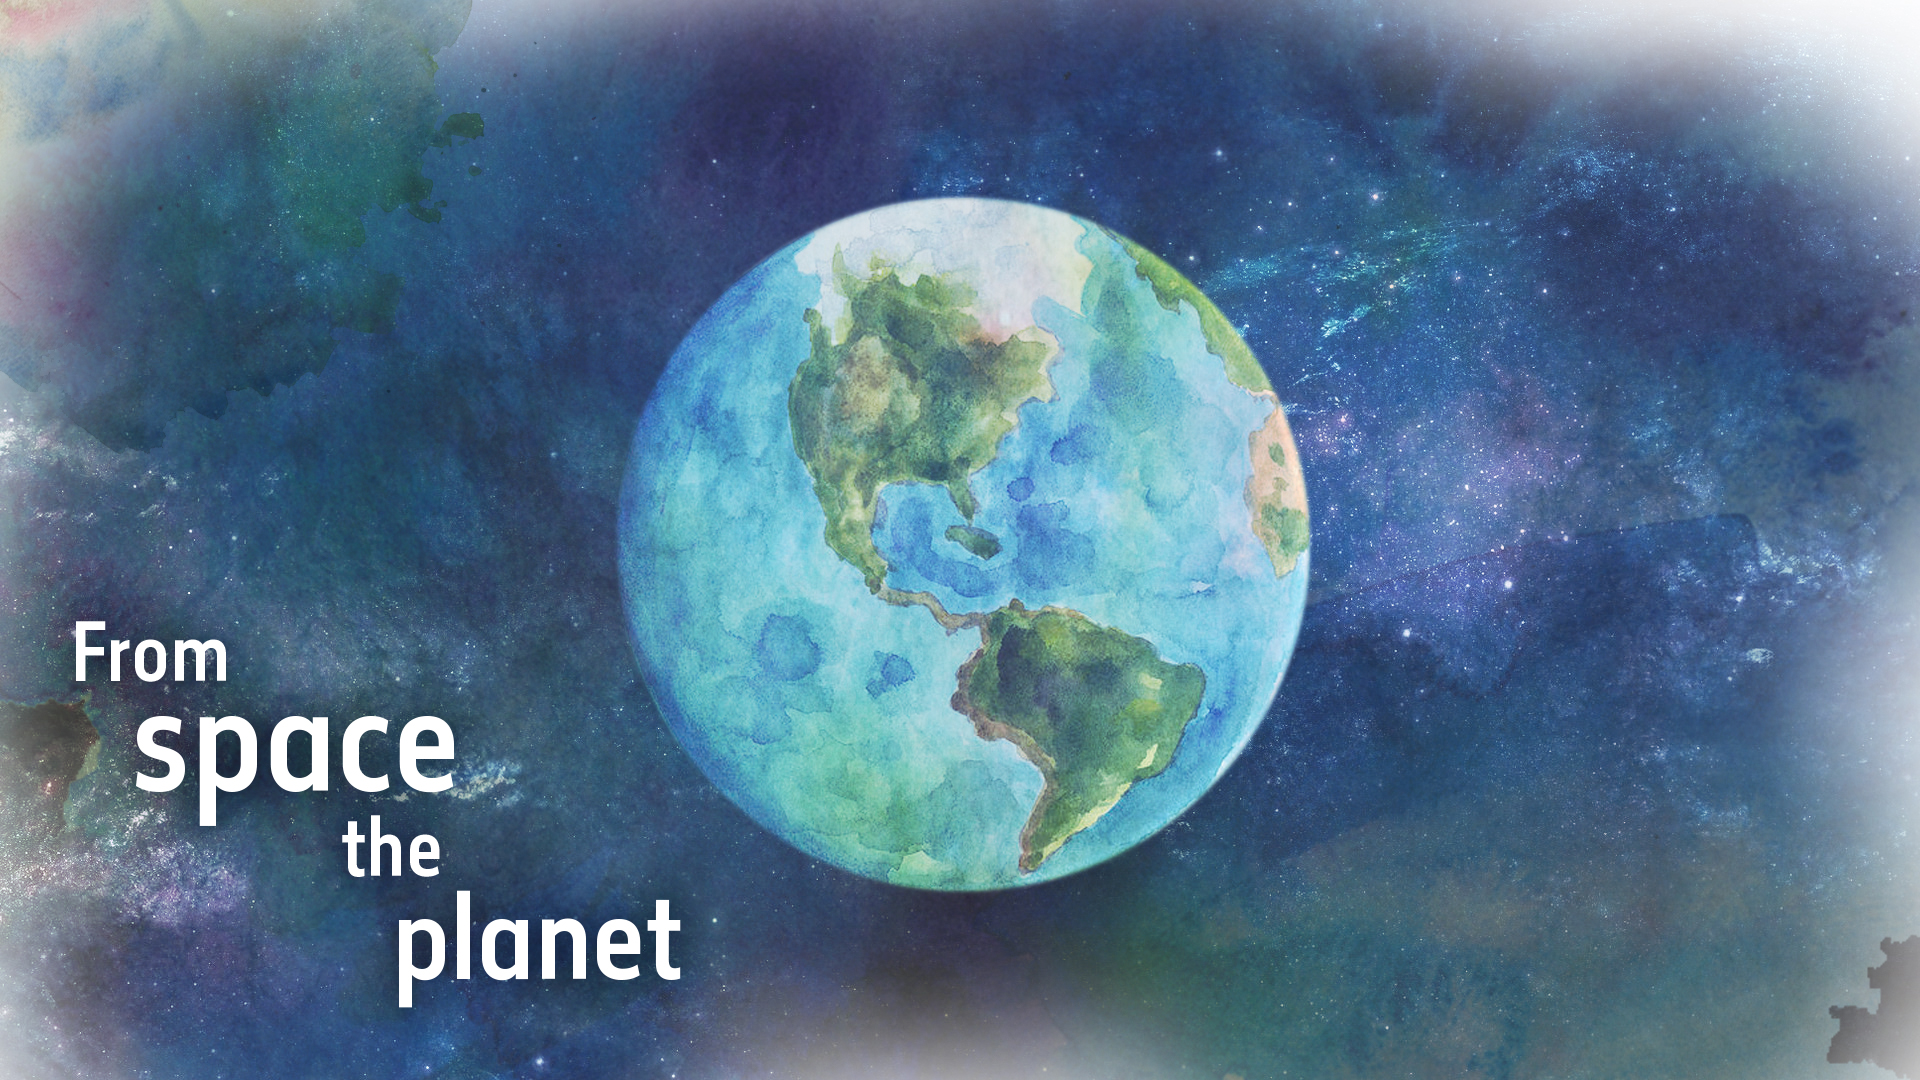 1 - A WATERCOLOUR IMAGE OF THE EARTH_with_text_2.jpg